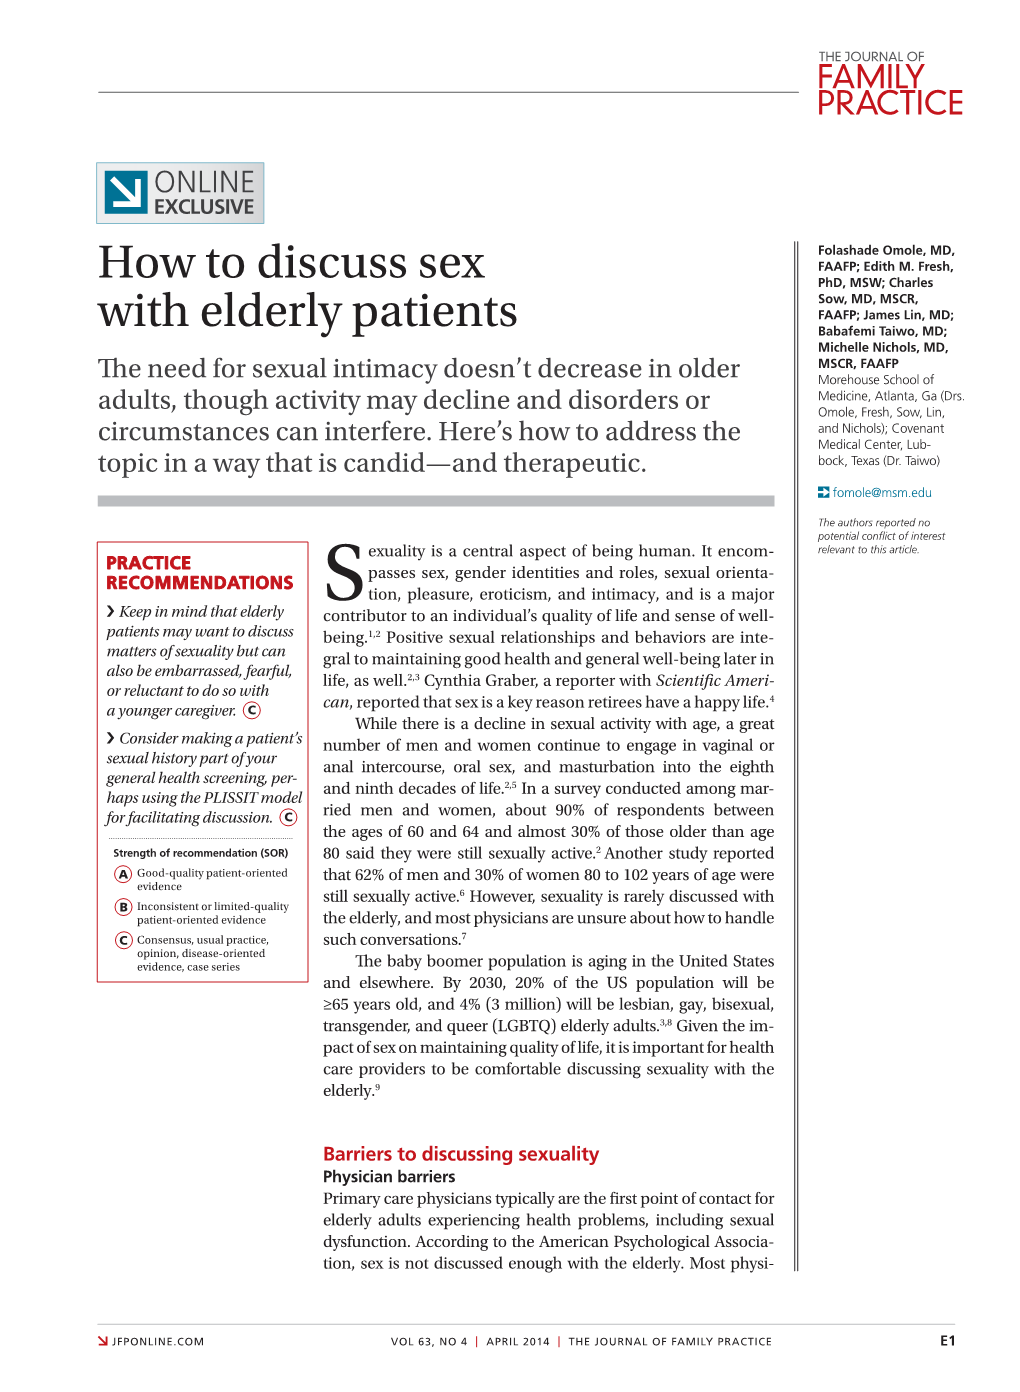 How to Discuss Sex with Elderly Patients